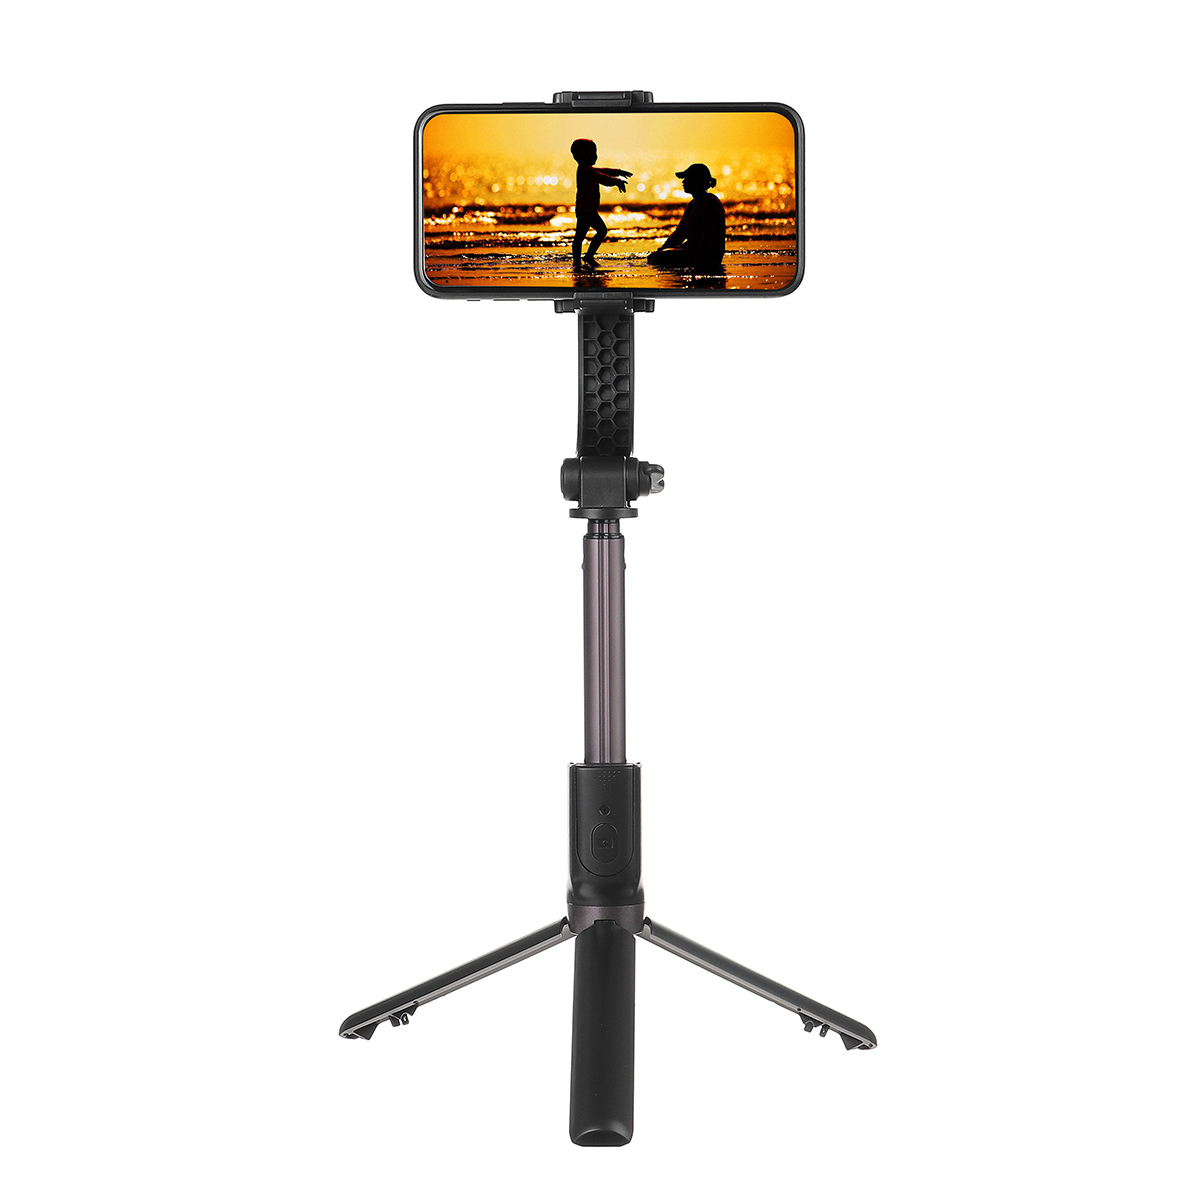 R15-Extended-Telescopic-bluetooth-Wireless-Handheld-Stabilizer-Mobile-Phone-Holder-Stand-for-Outdoor-1822120-5